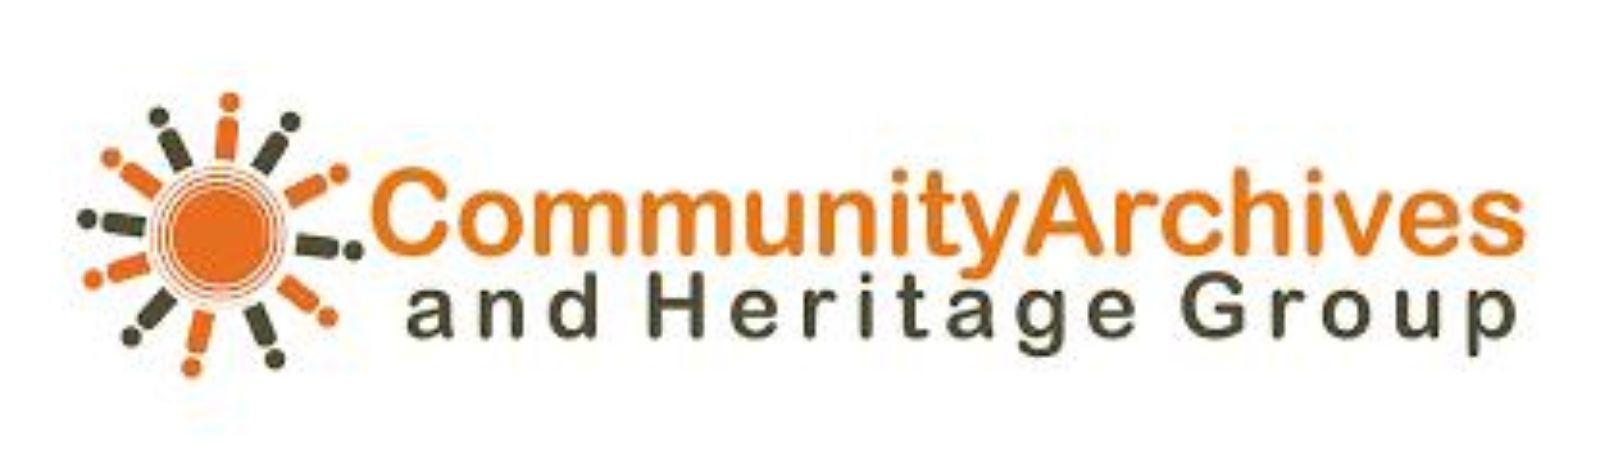 Community Archive and Heritage Awards